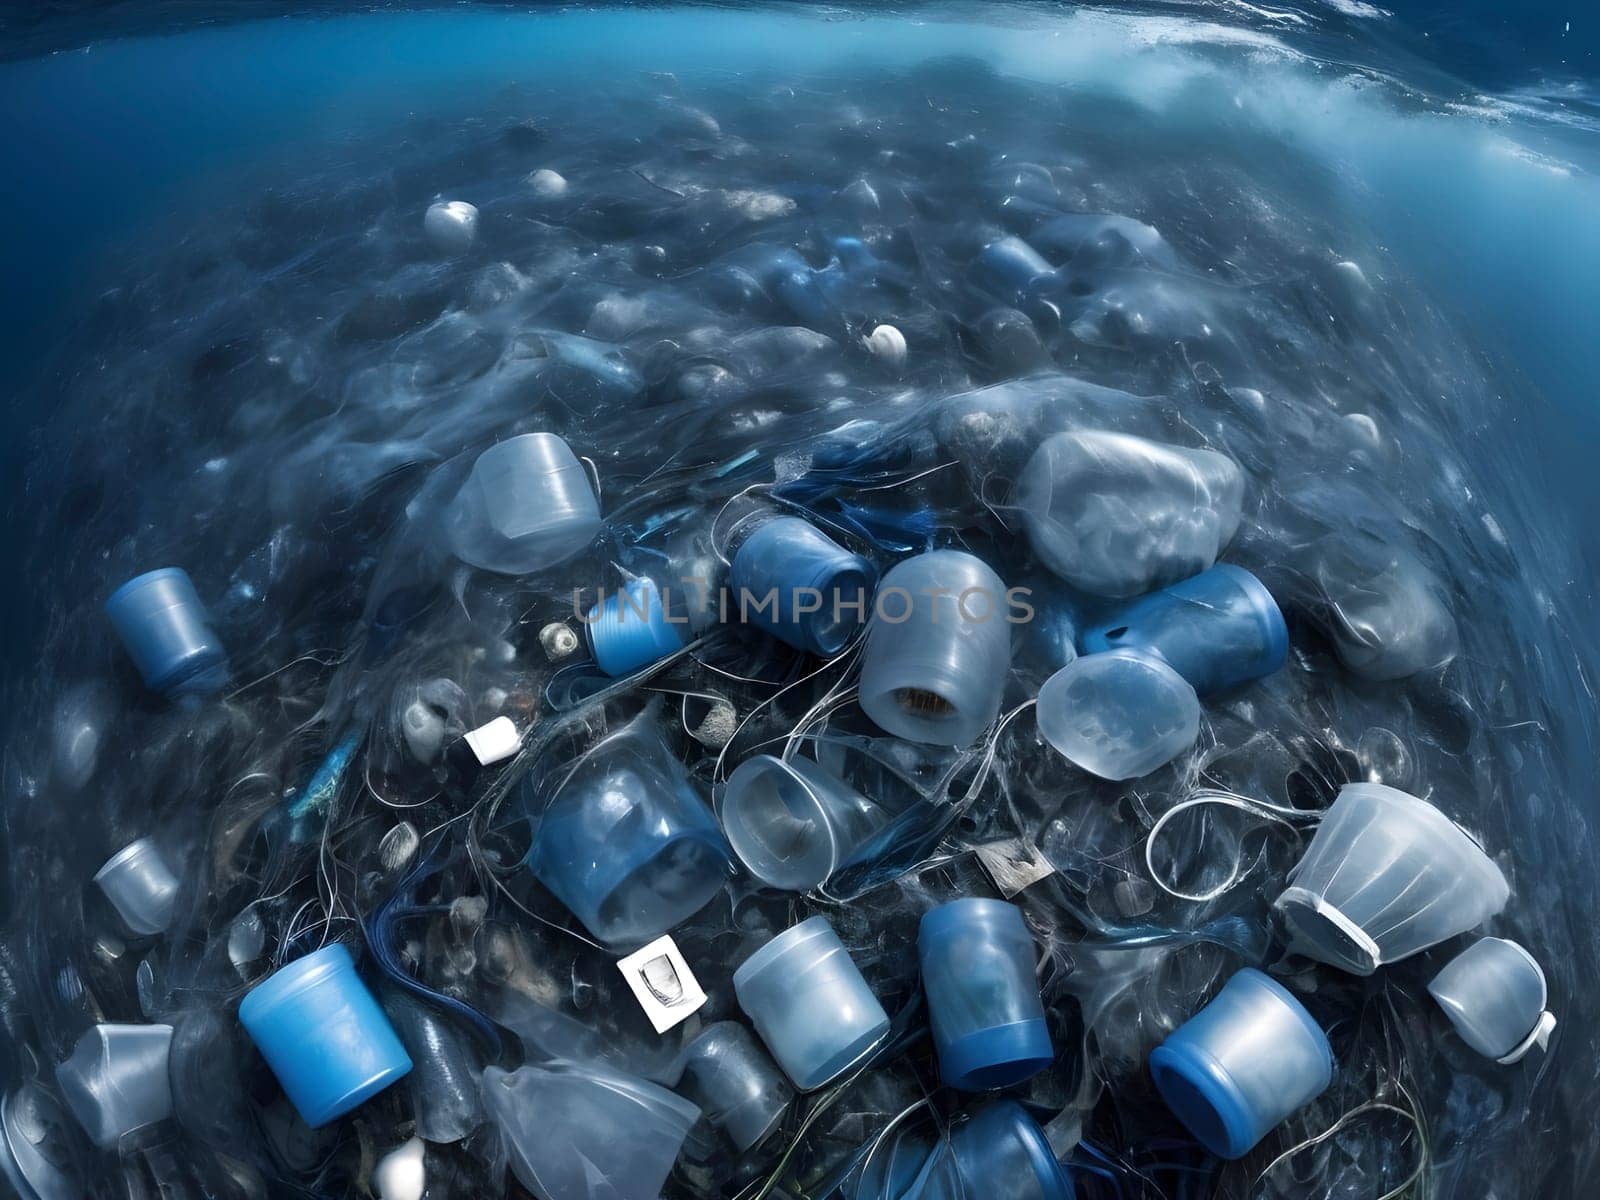 Blue Horizons, Plastic Realities. A Visual Call to Protect Our Oceans.